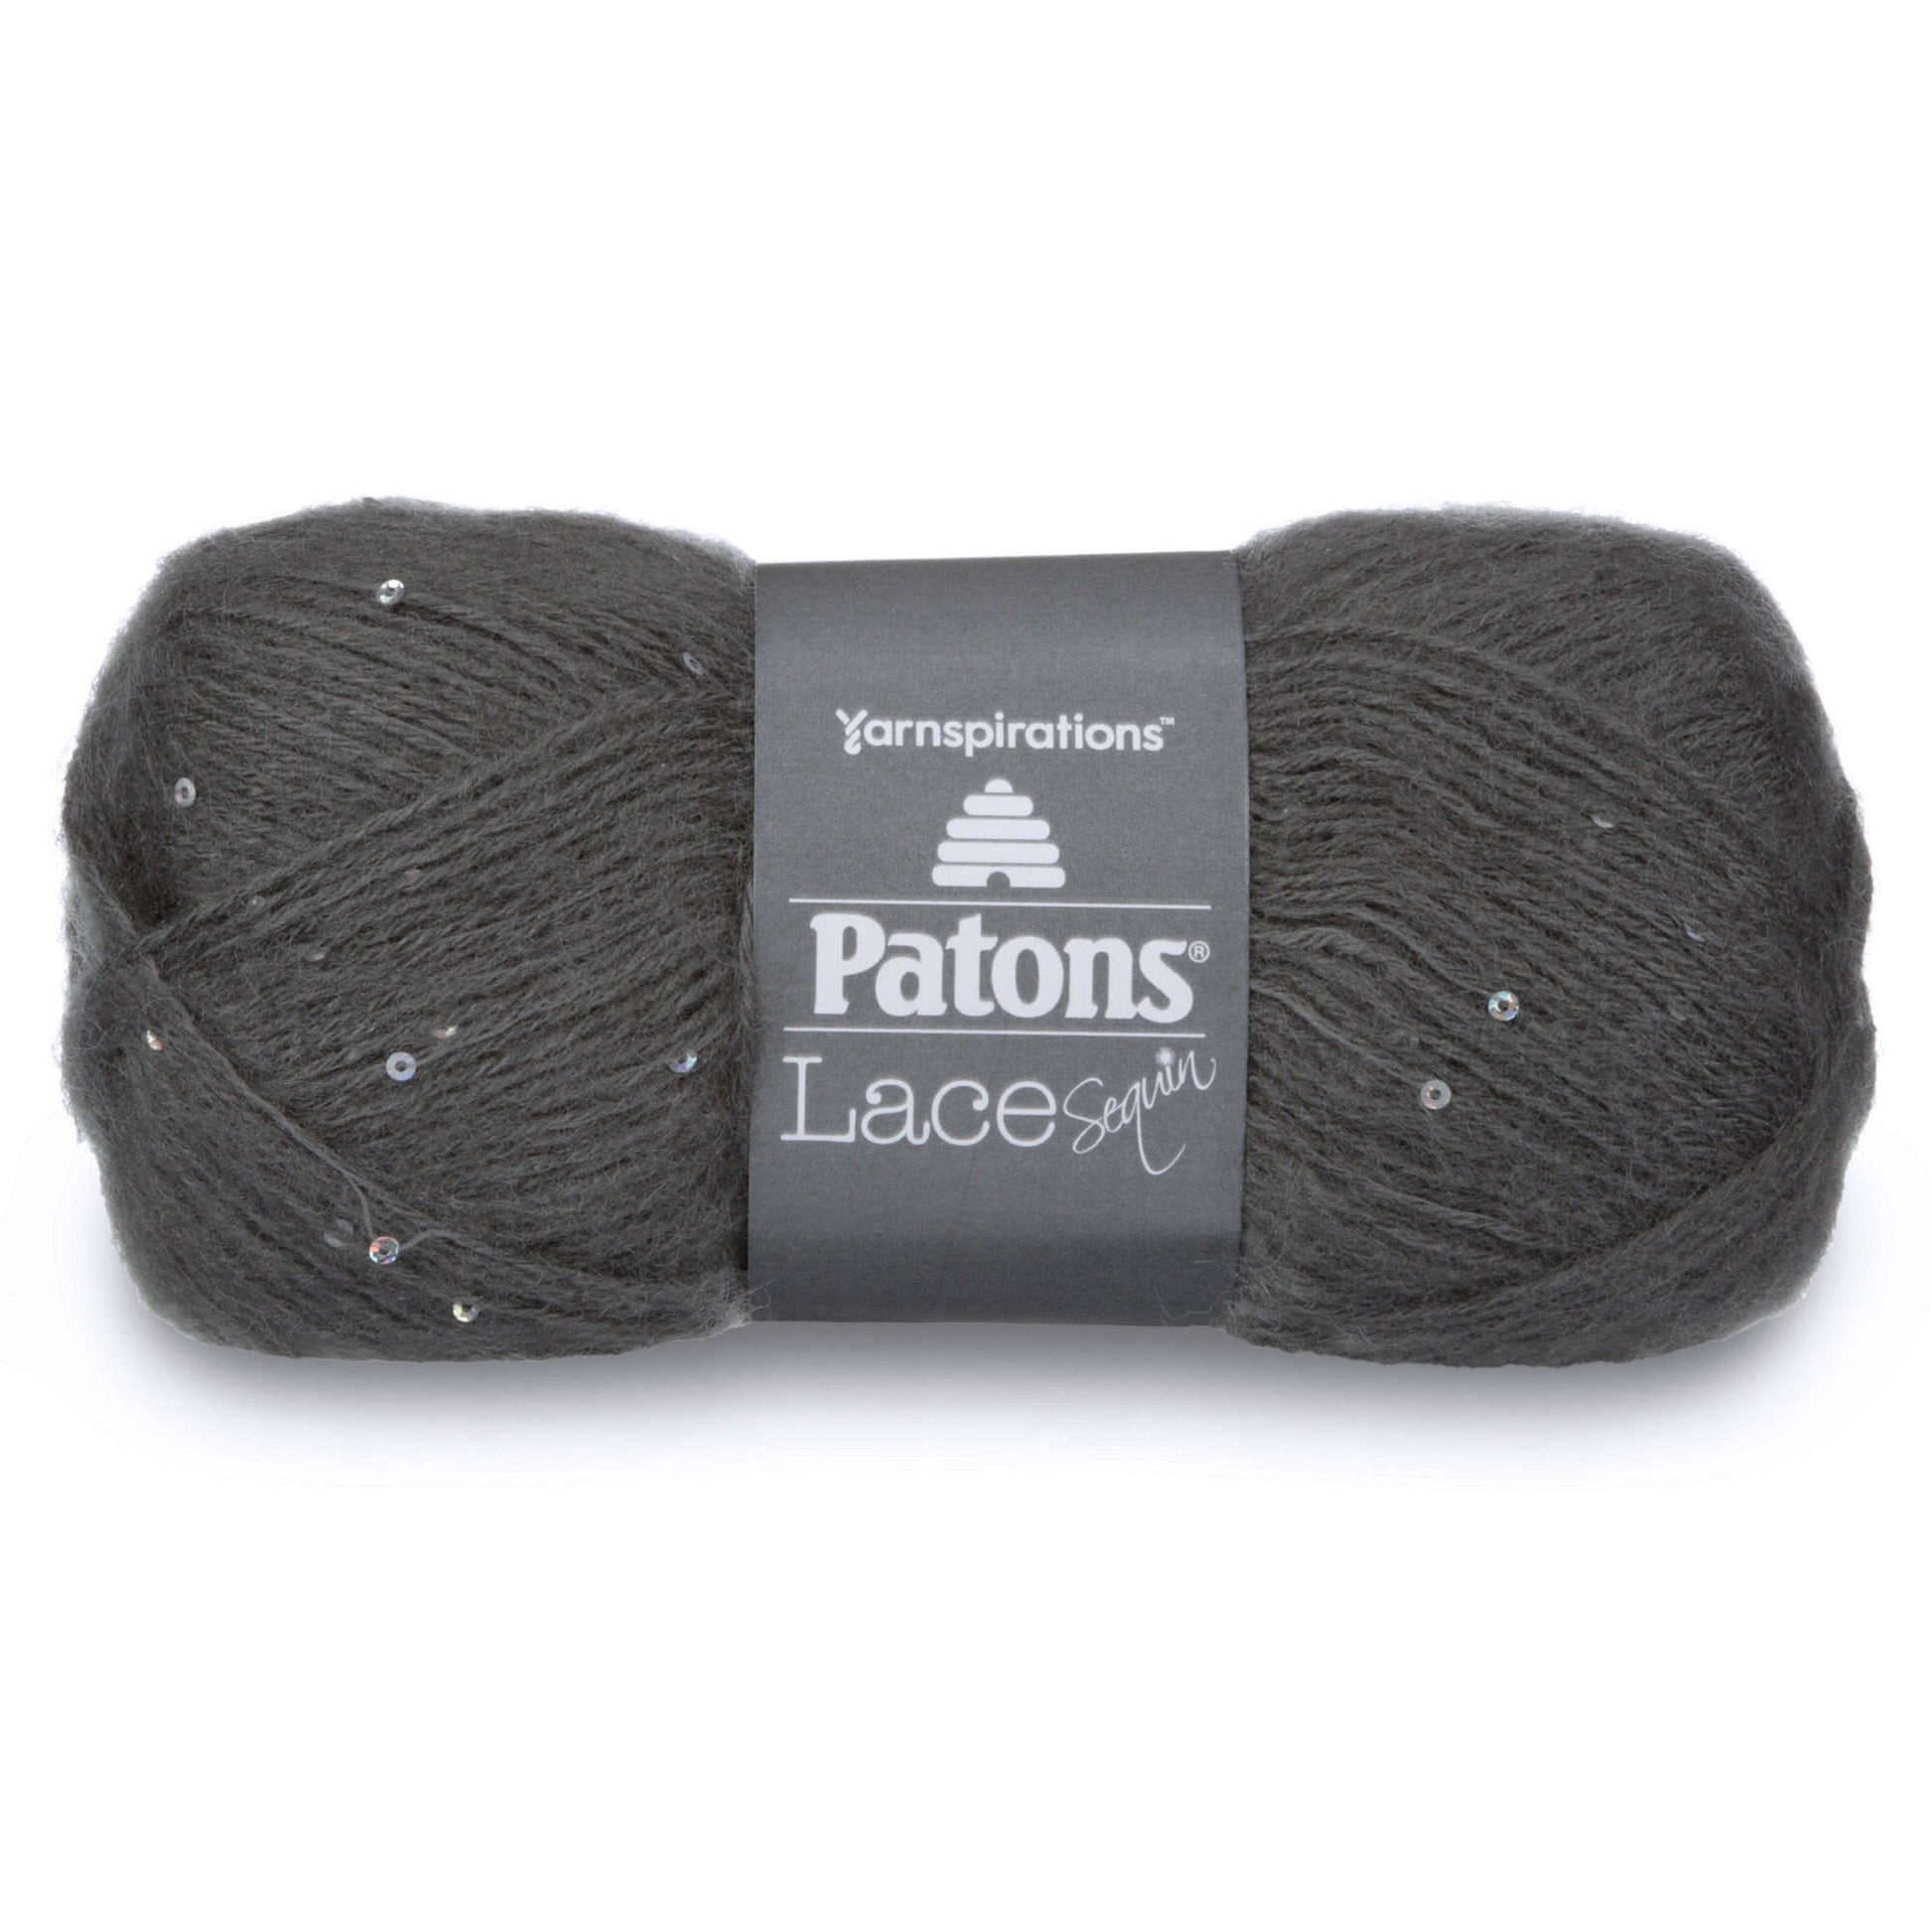 Patons Lace Sequin Yarn - Discontinued Smoky Quartz